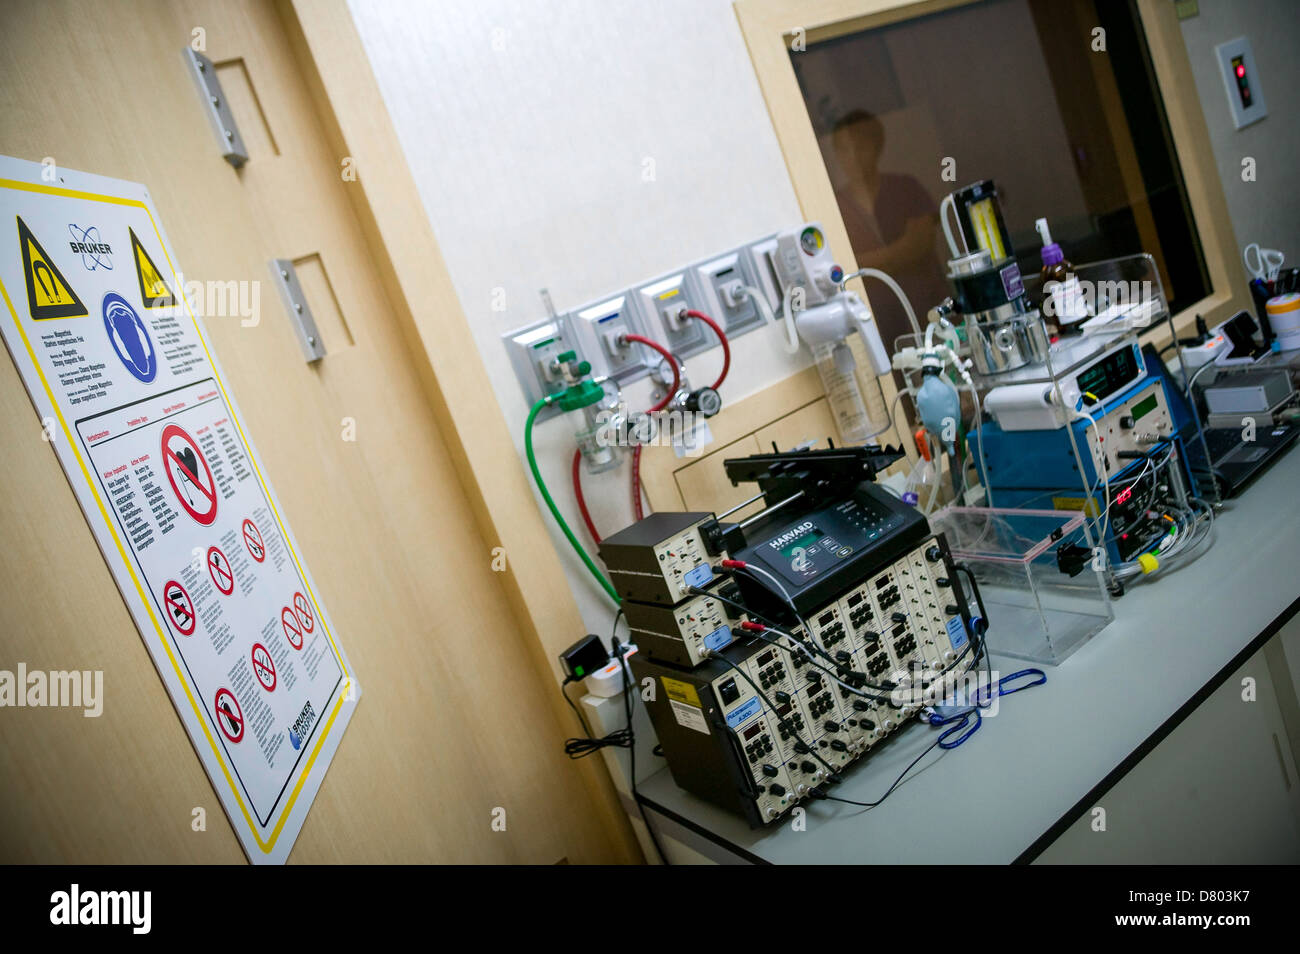 Equipment in an Imaging Lab. Stock Photo